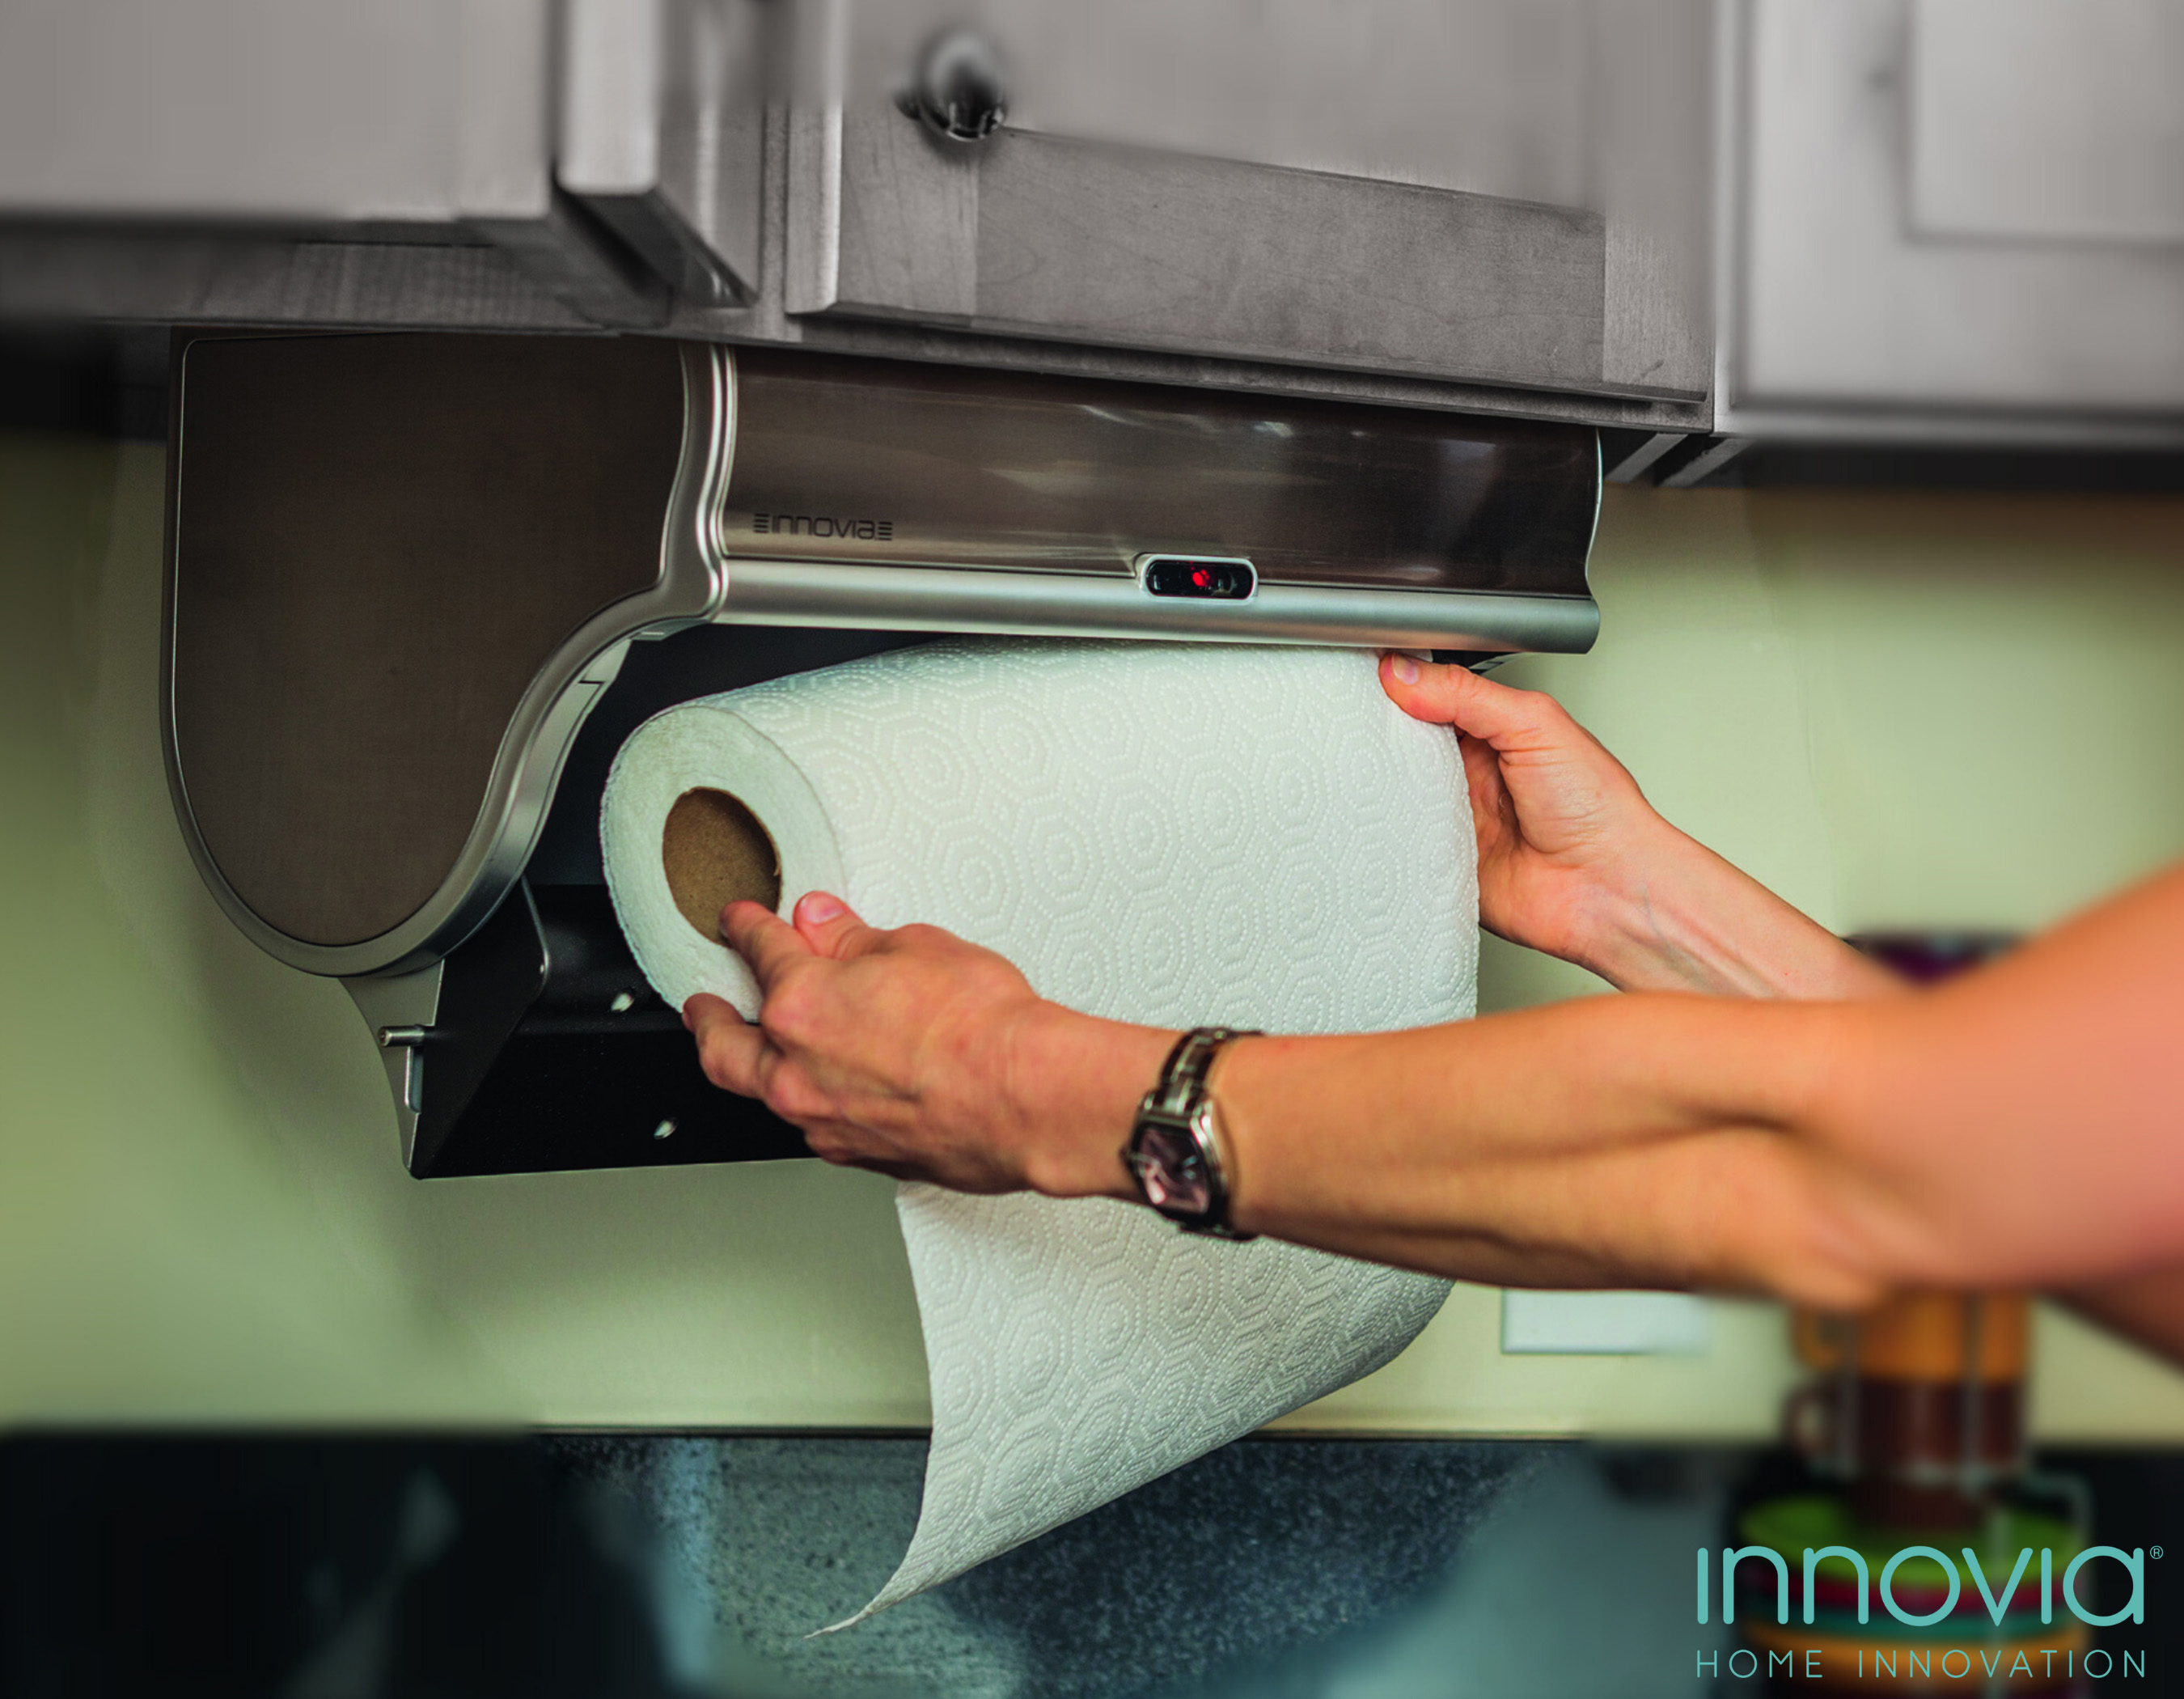 The Innovia® Paper Towel Dispenser is easy to install and ready to provide hands-free clean up in just minutes.